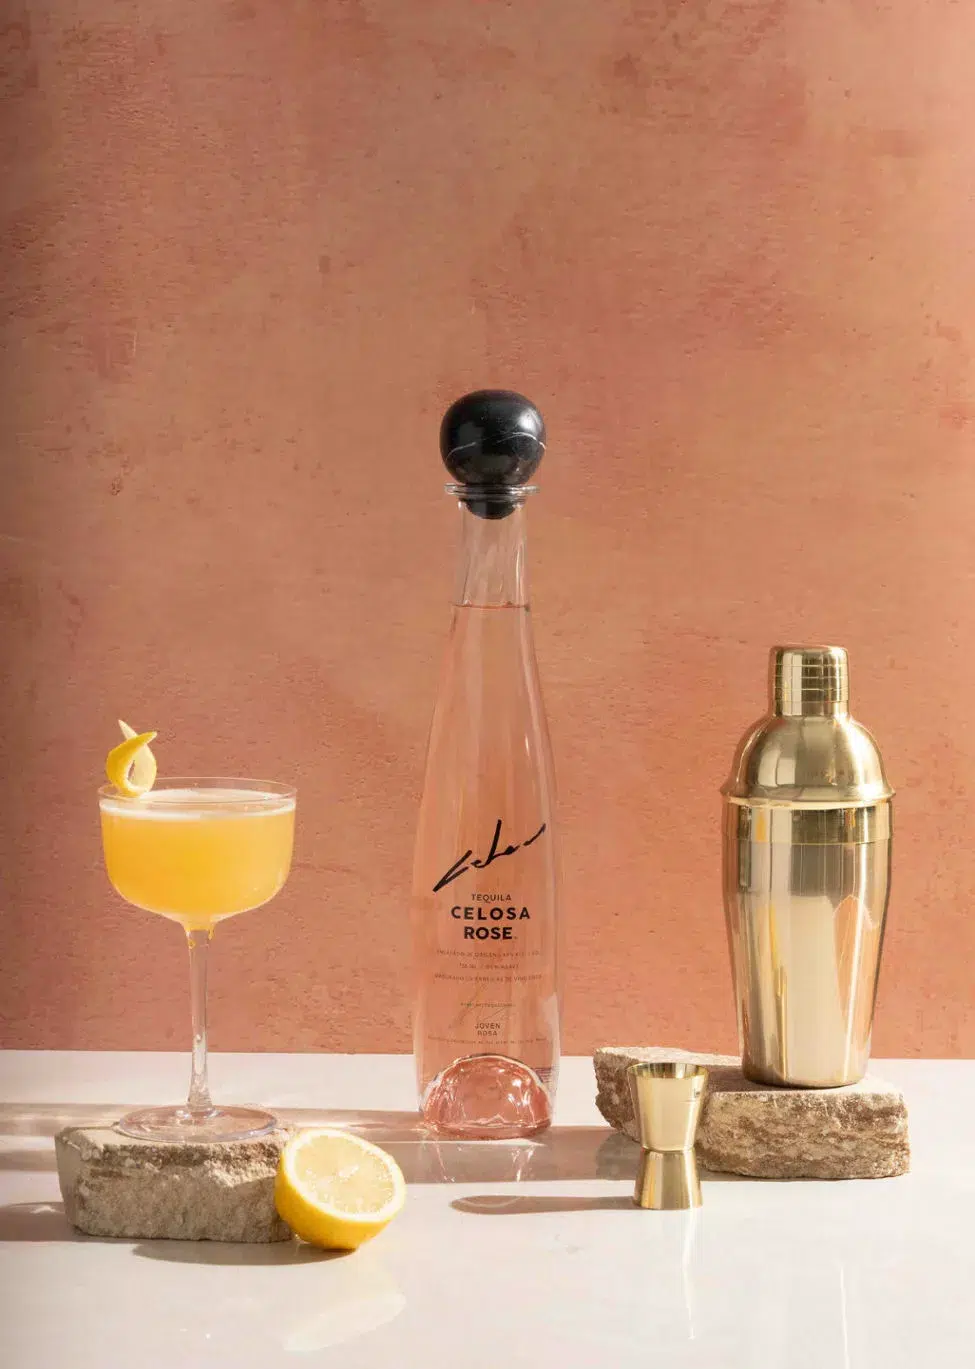 Elegant setup featuring Celosa Rose Tequila bottle alongside a citrusy Celosa Zest cocktail with a lemon twist, a gold cocktail shaker, and jigger on natural stone coasters with a soft terracotta backdrop.